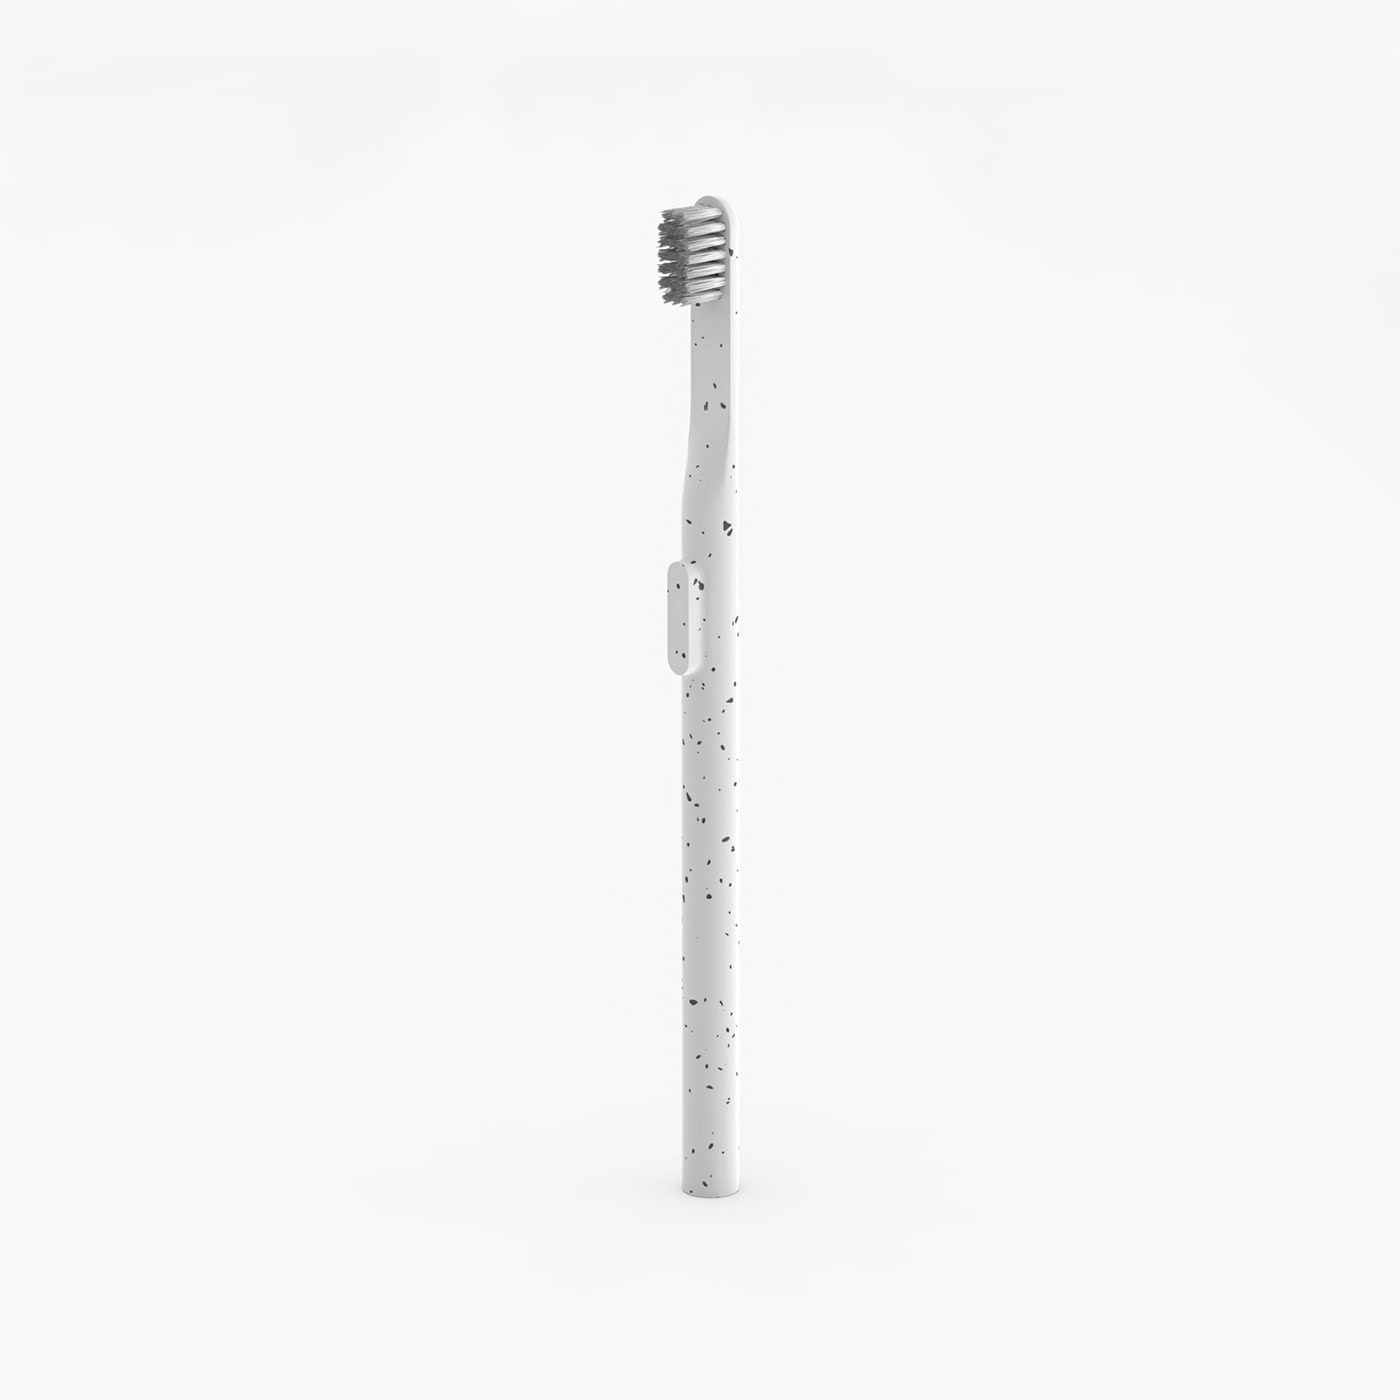 concept eletronic product design  toothbrush